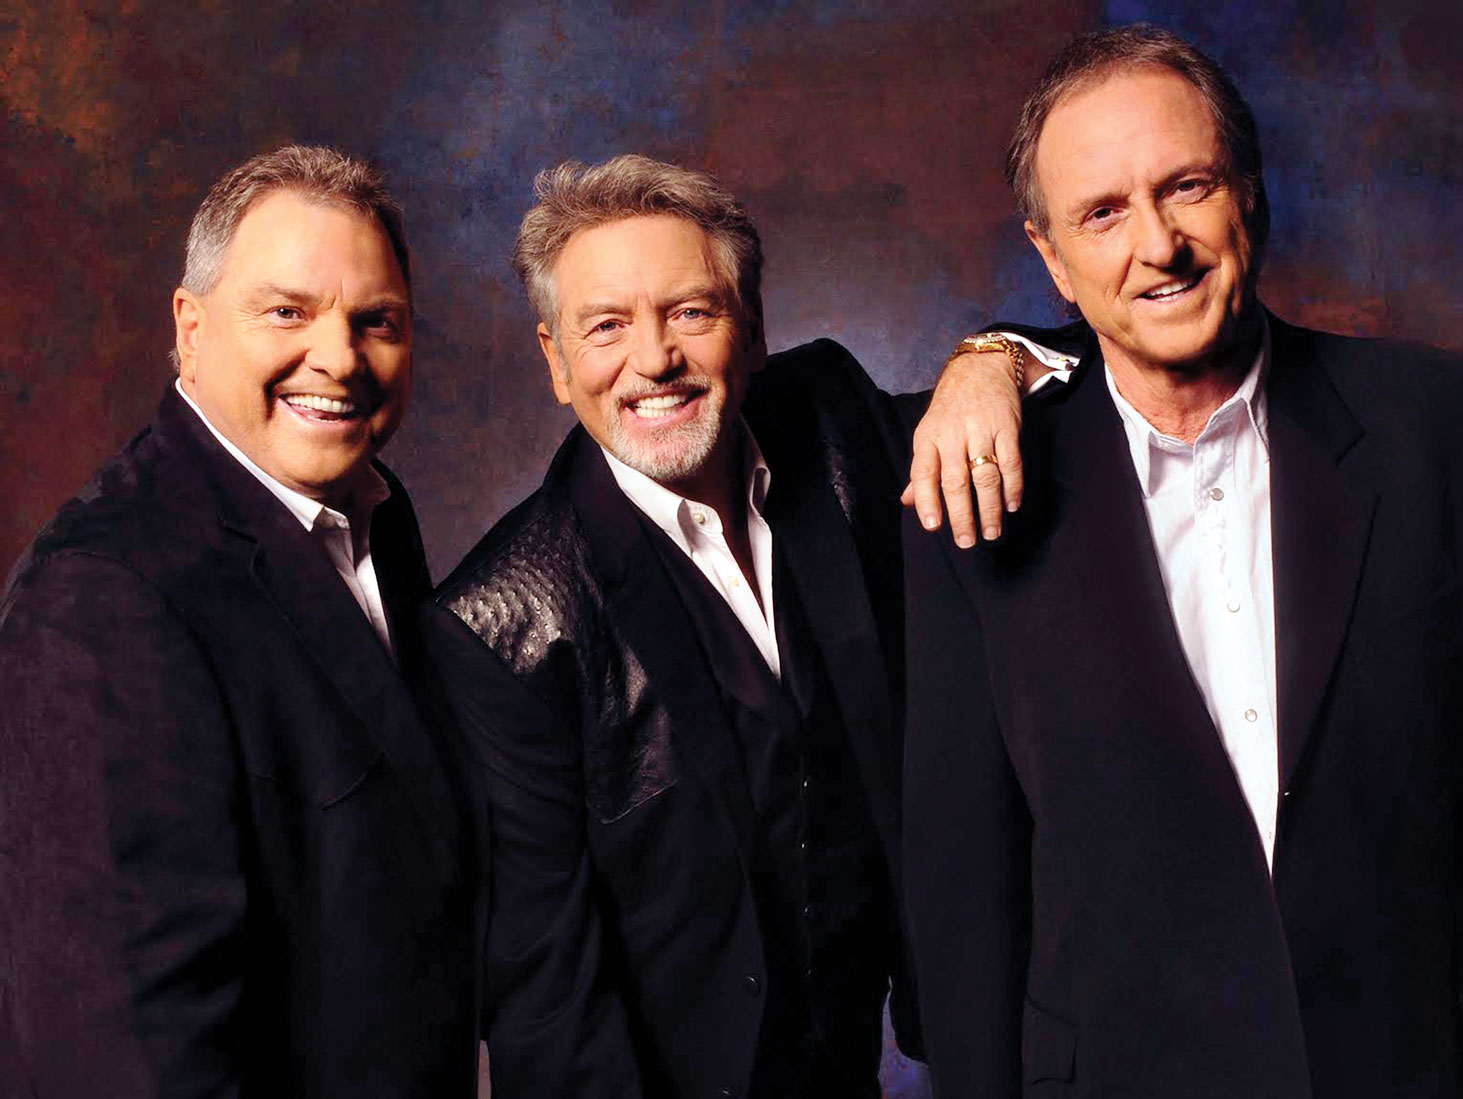 Larry Gatlin and The Gatlin Brothers.